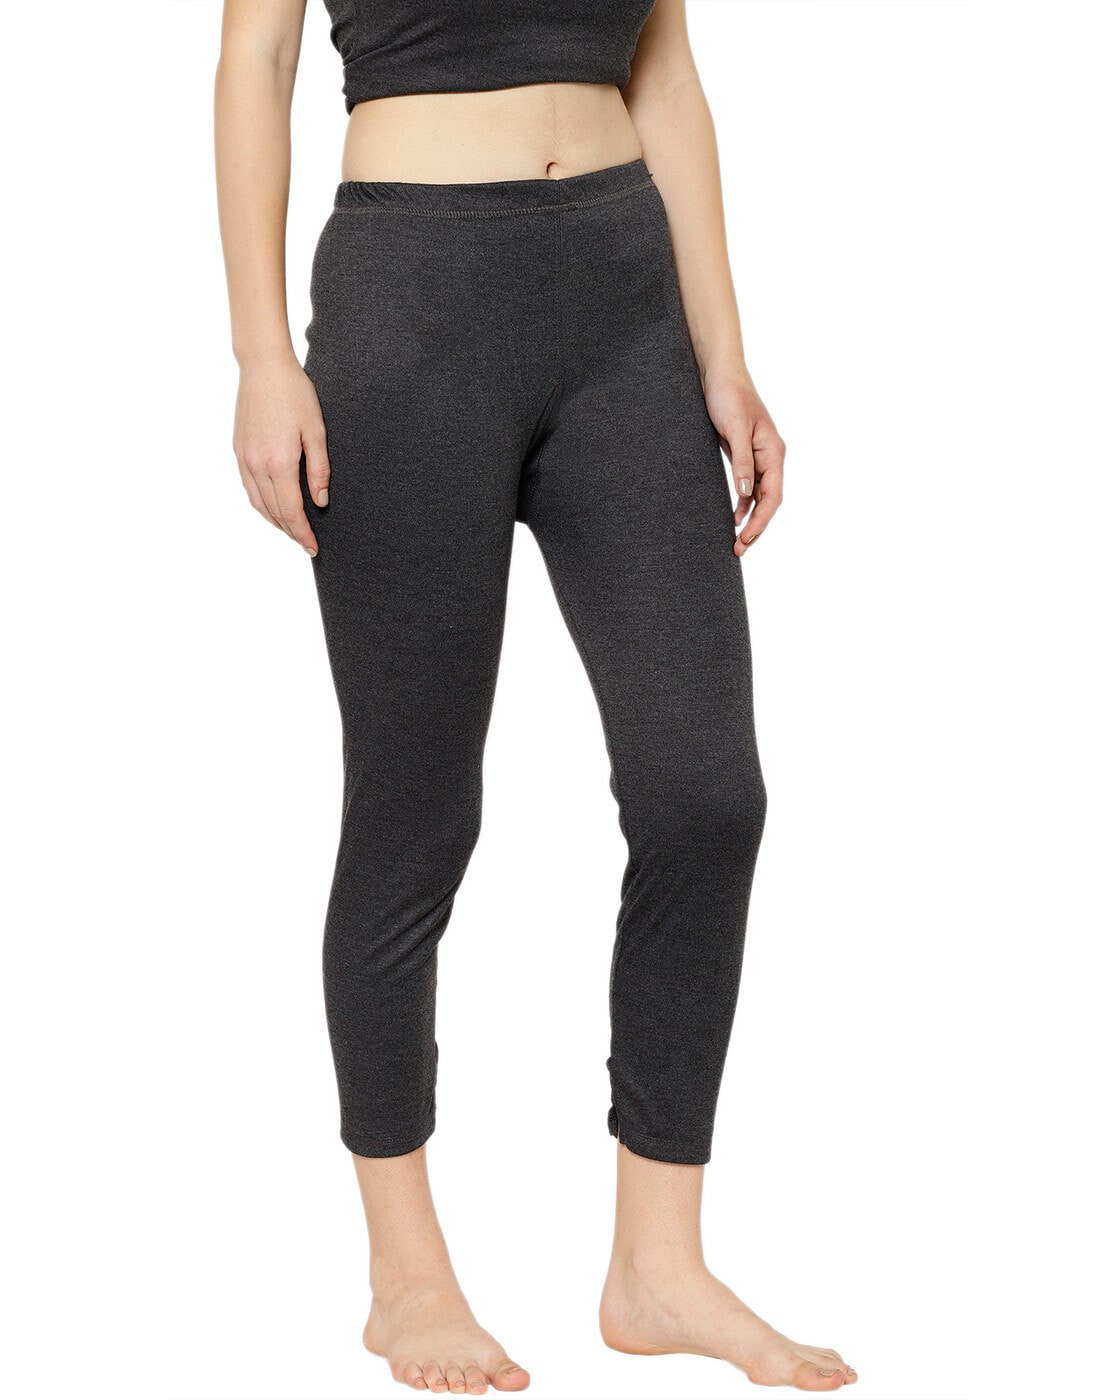 Women Thermal Leggings with Elasticated Waistband